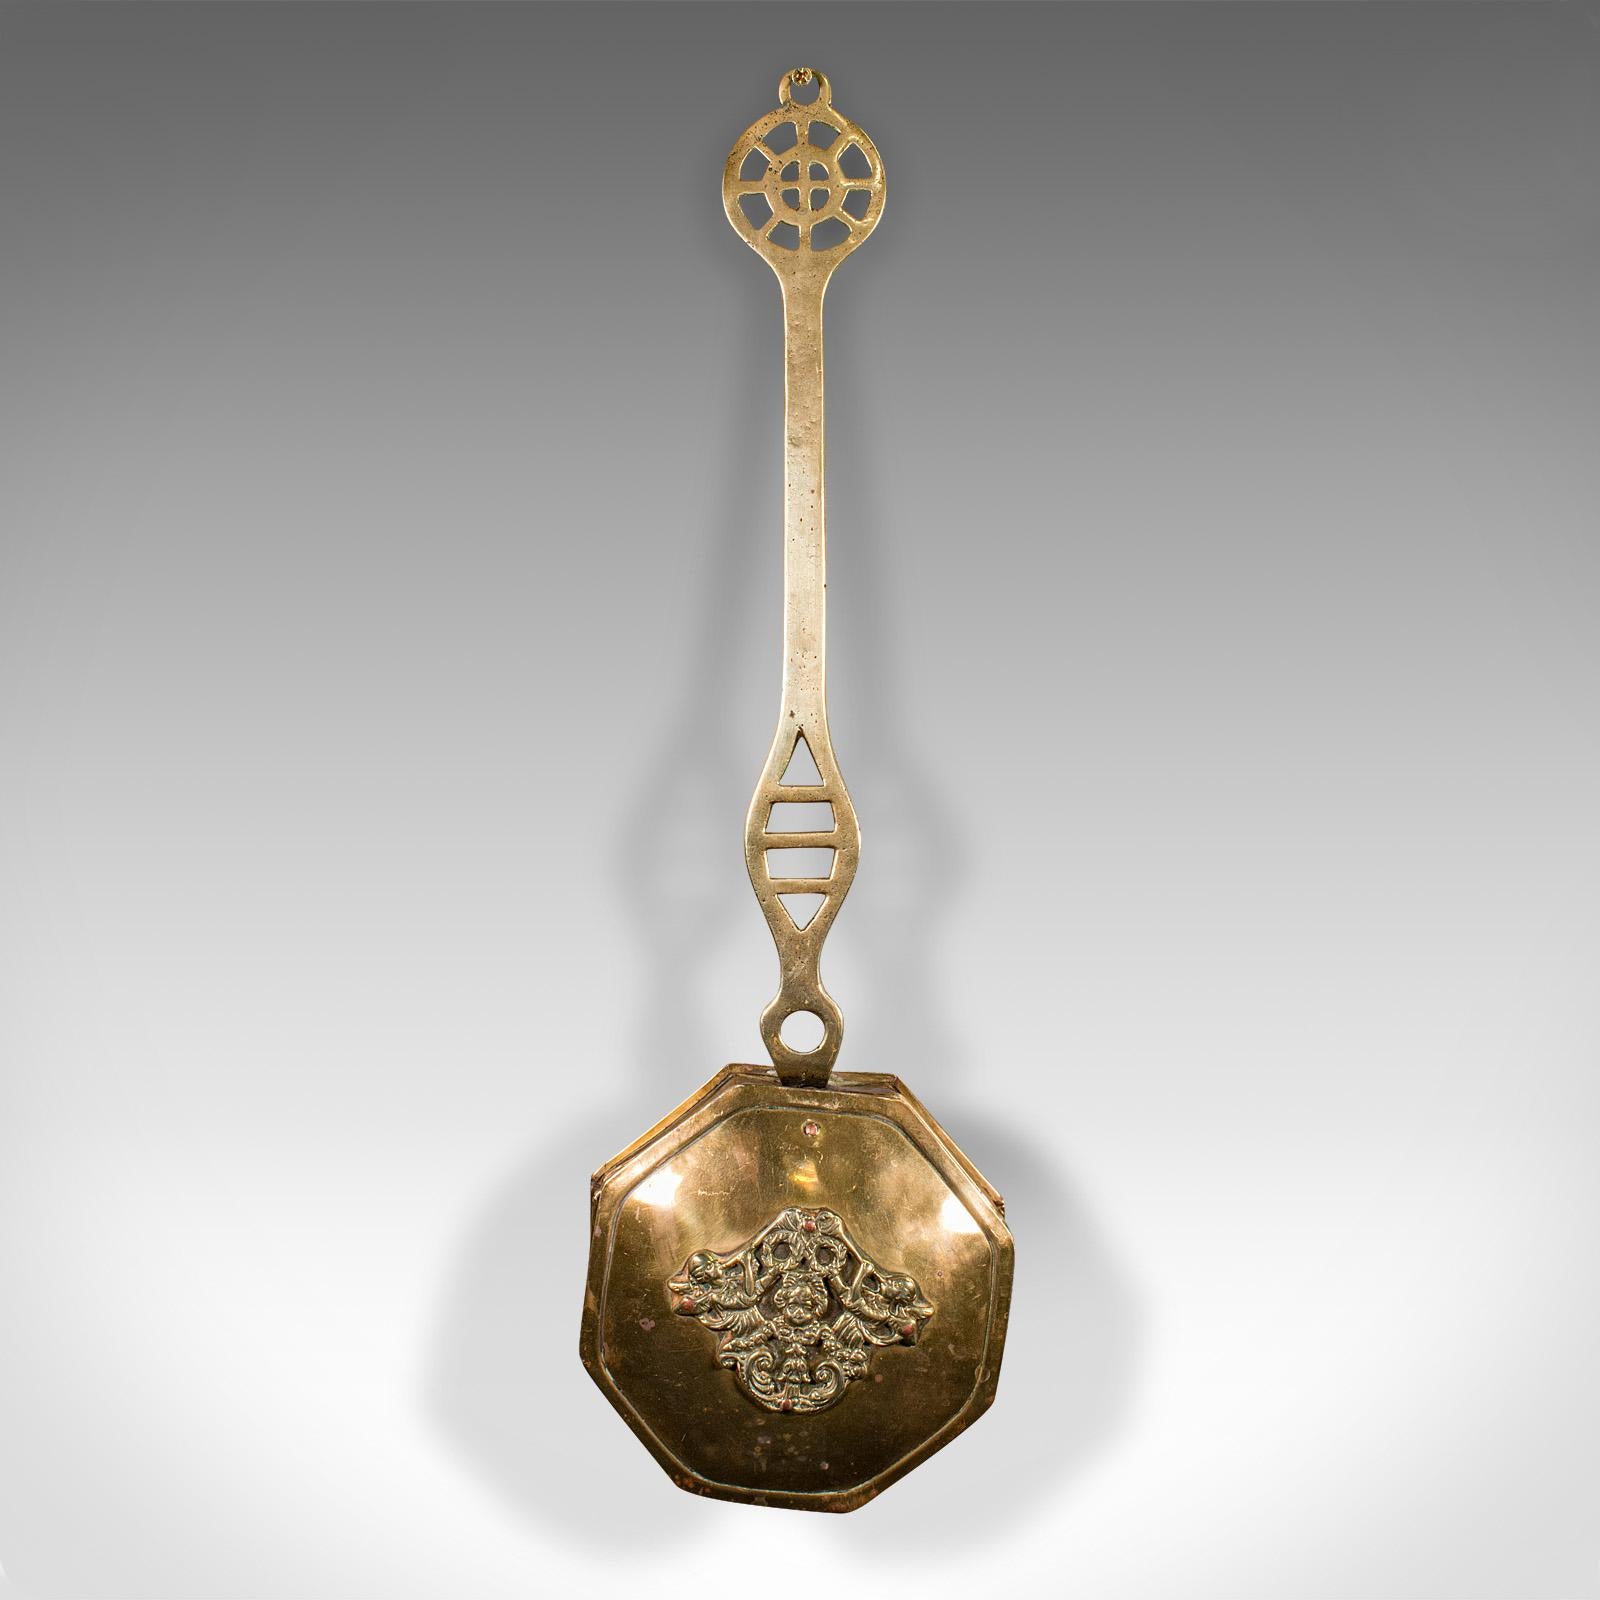 This is an antique chestnut warmer. An English, brass hanging roaster, dating to the Georgian period, circa 1800.

Fascinating Georgian warmer with an appealing decorative motif
Displays a desirable aged patina and in good original order
Brass